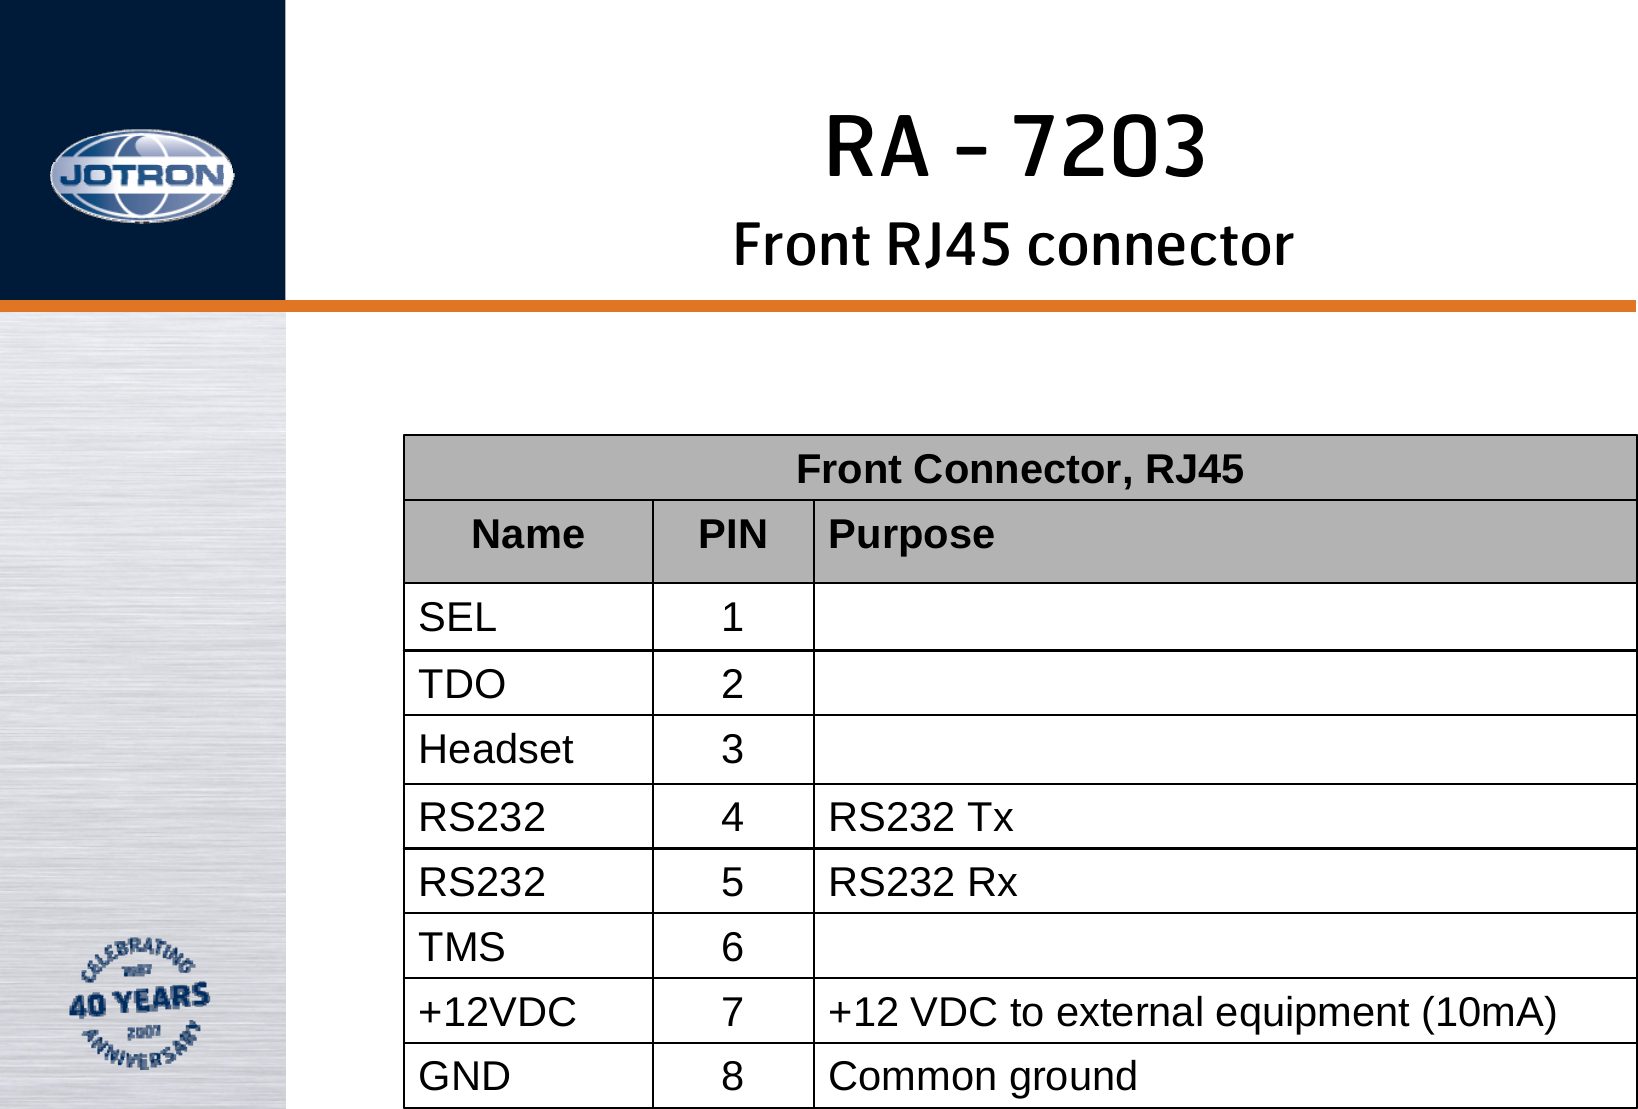 RA - 7203Front RJ45 connectorFront Connector, RJ45Name PIN PurposeSEL 1TDO 2Headset 3RS232 4RS232 TxRS232 5RS232 RxTMS 6+12VDC 7+12 VDC to external equipment (10mA)GND 8Common ground 